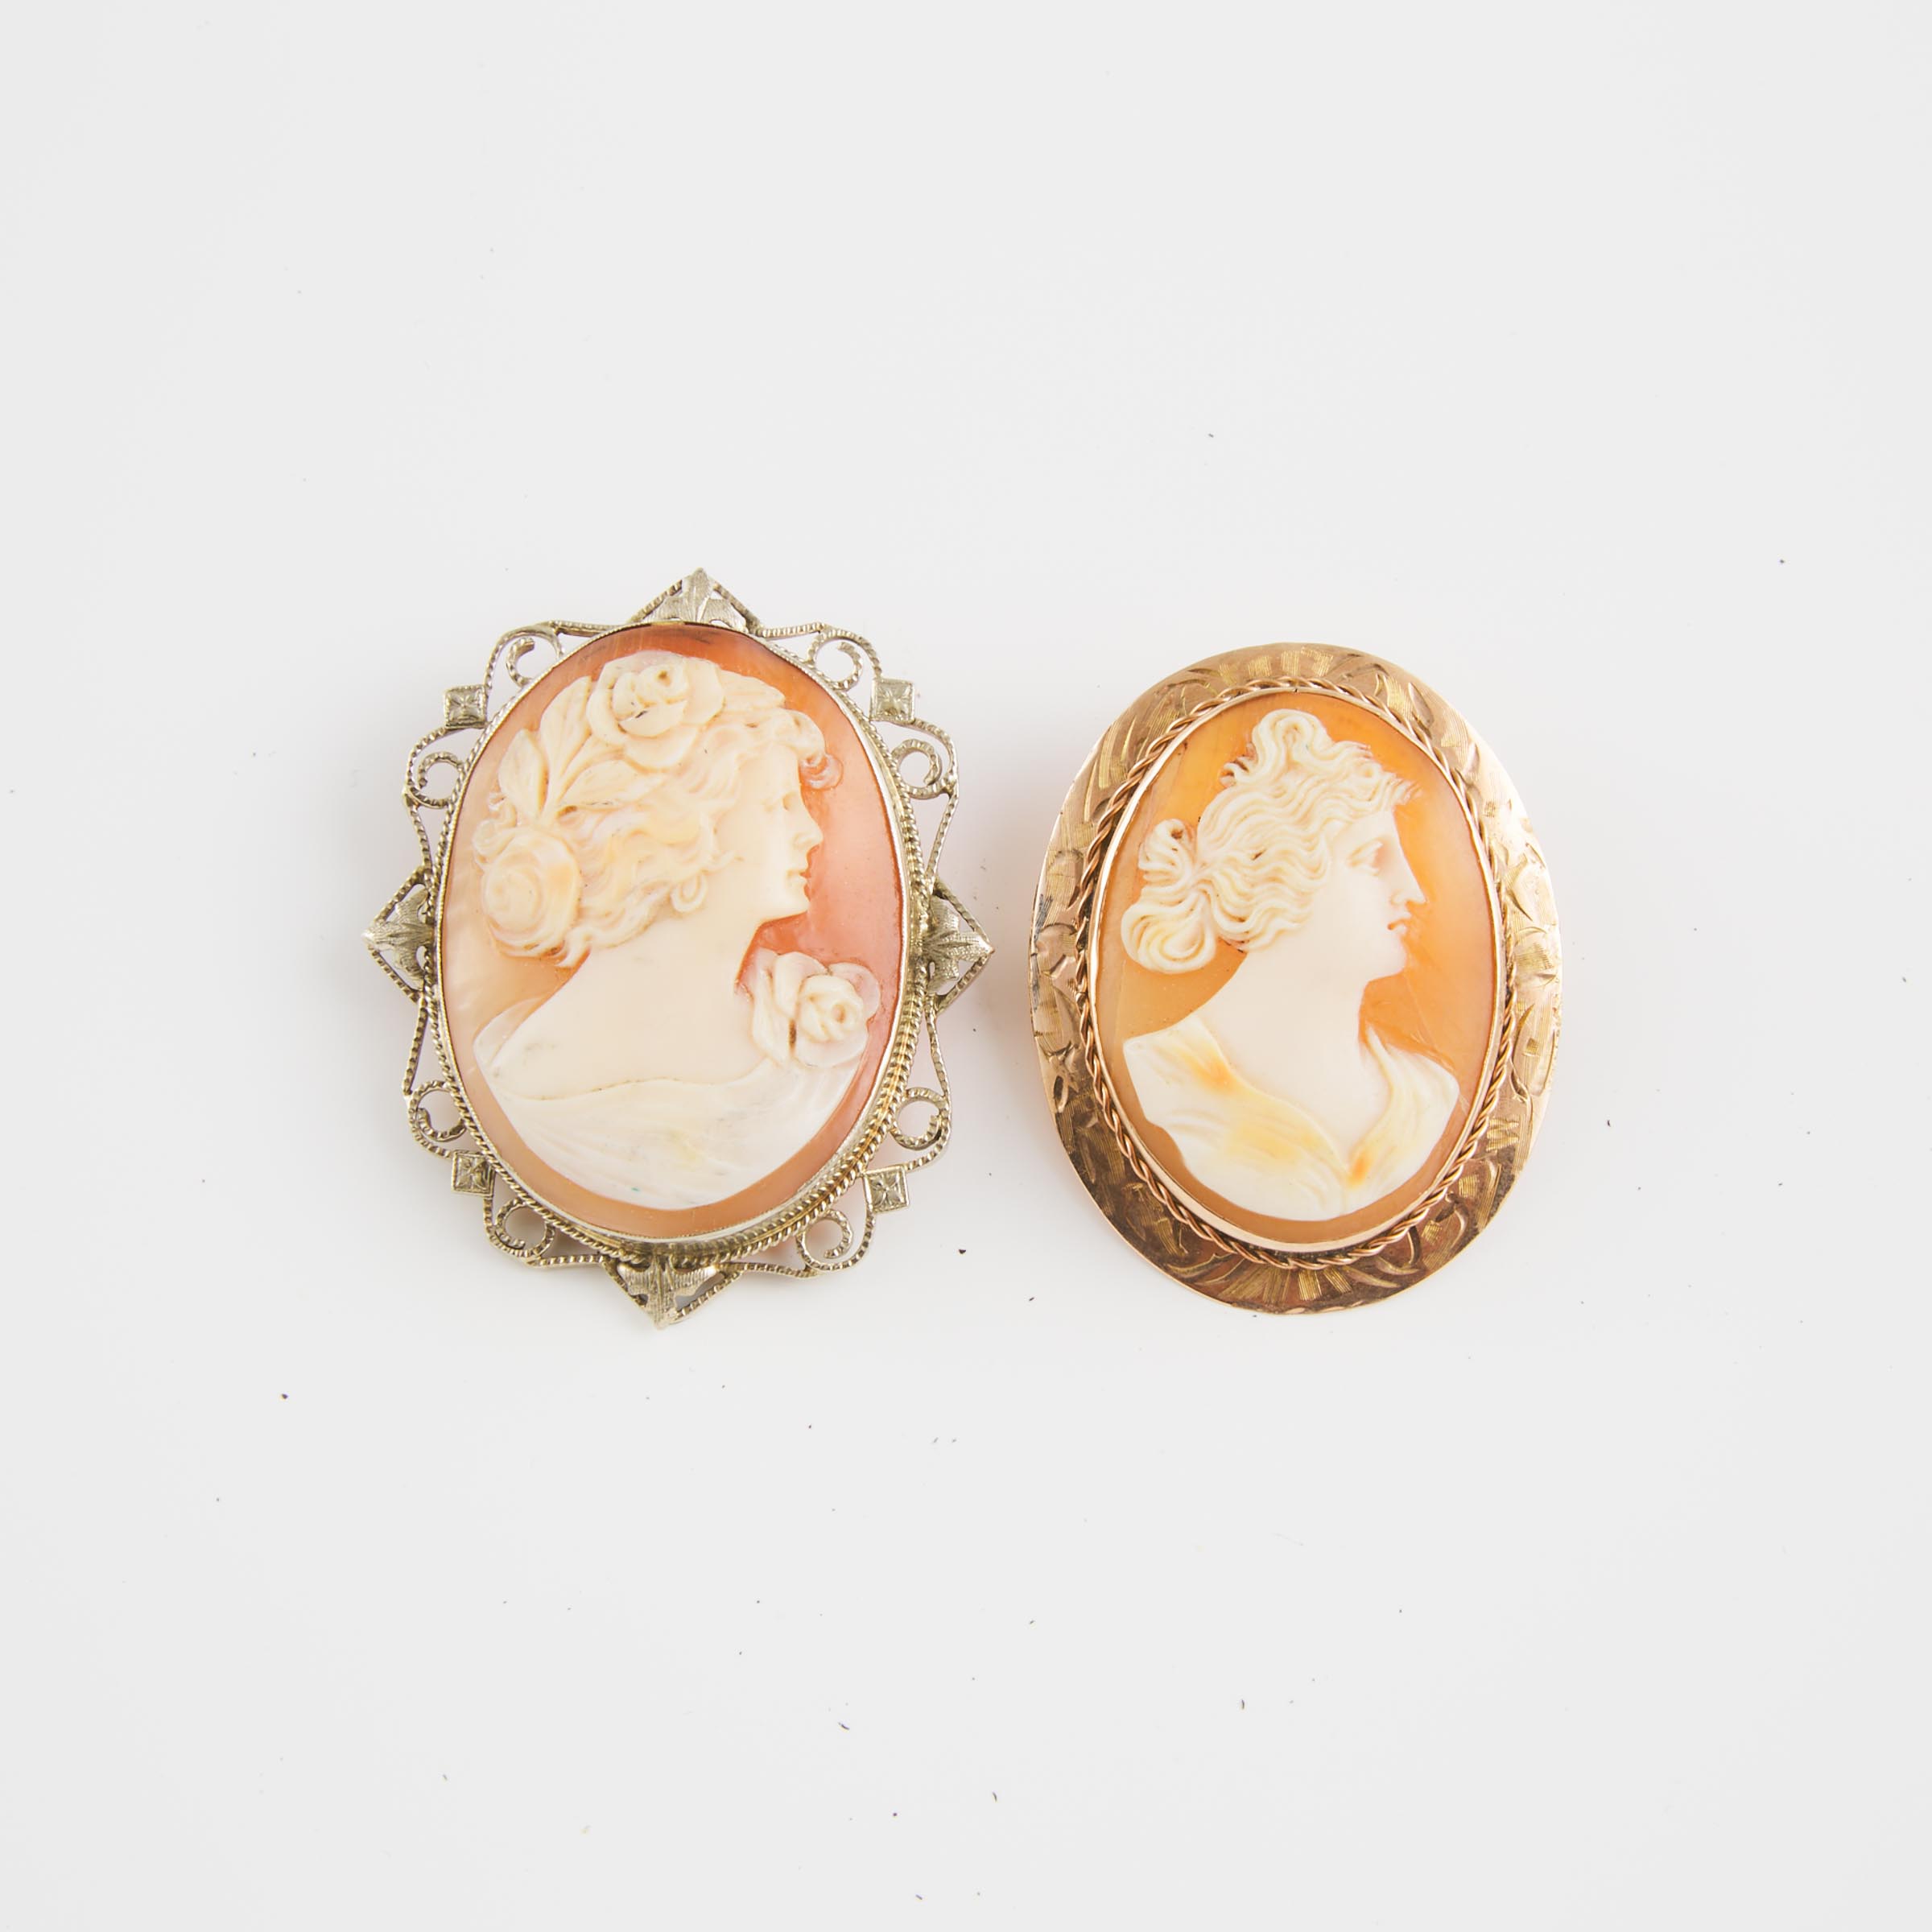 Two Carved Cameos